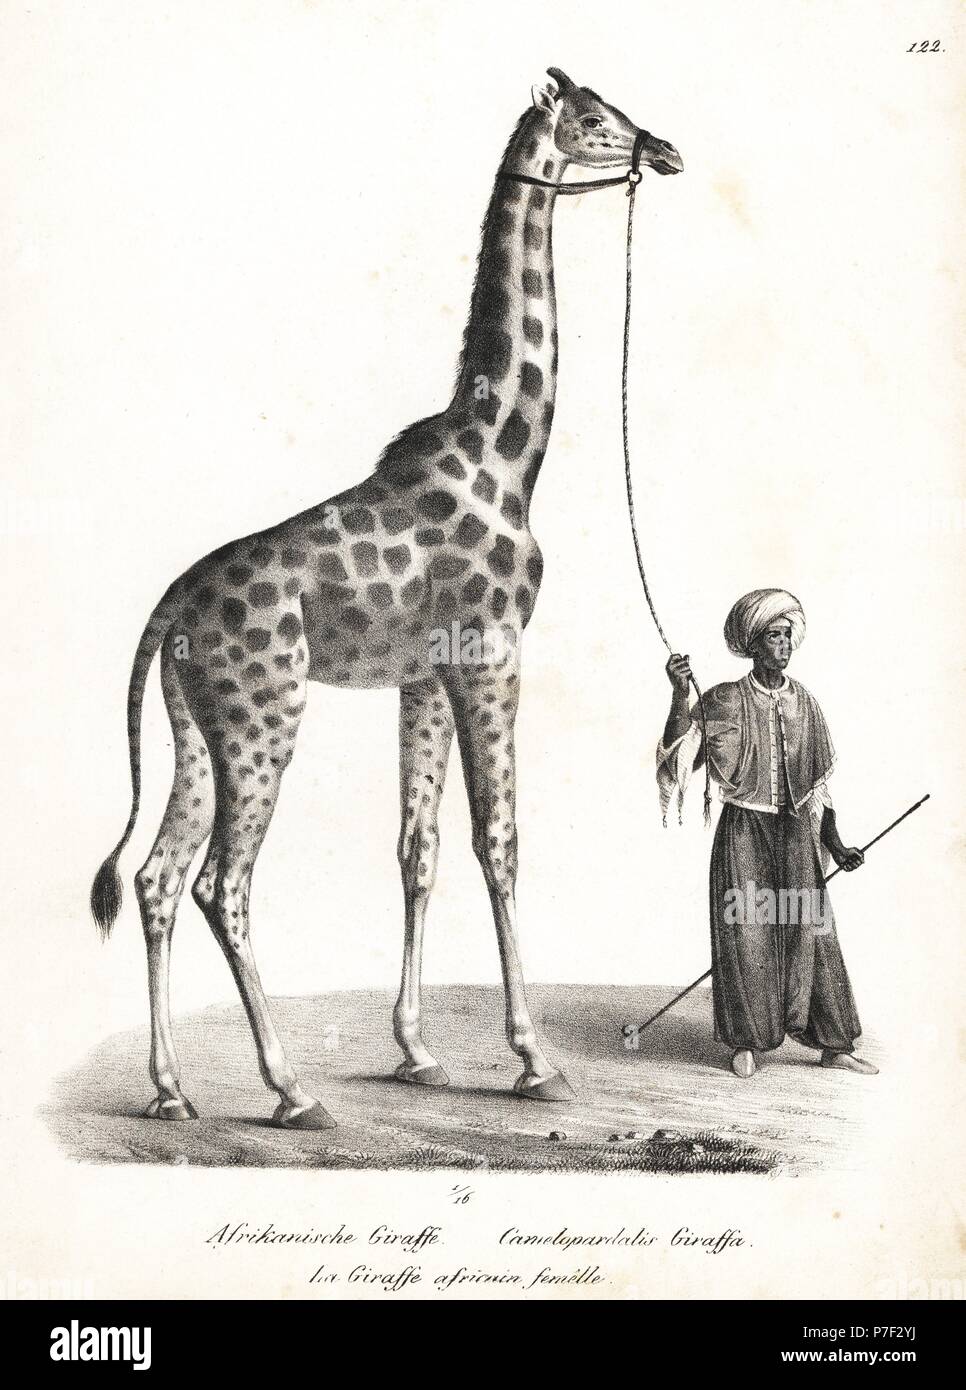 Giraffe, Giraffa camelopardalis, female. Lithograph by Karl Joseph Brodtmann from Heinrich Rudolf Schinz's Illustrated Natural History of Men and Animals, 1836. Stock Photo